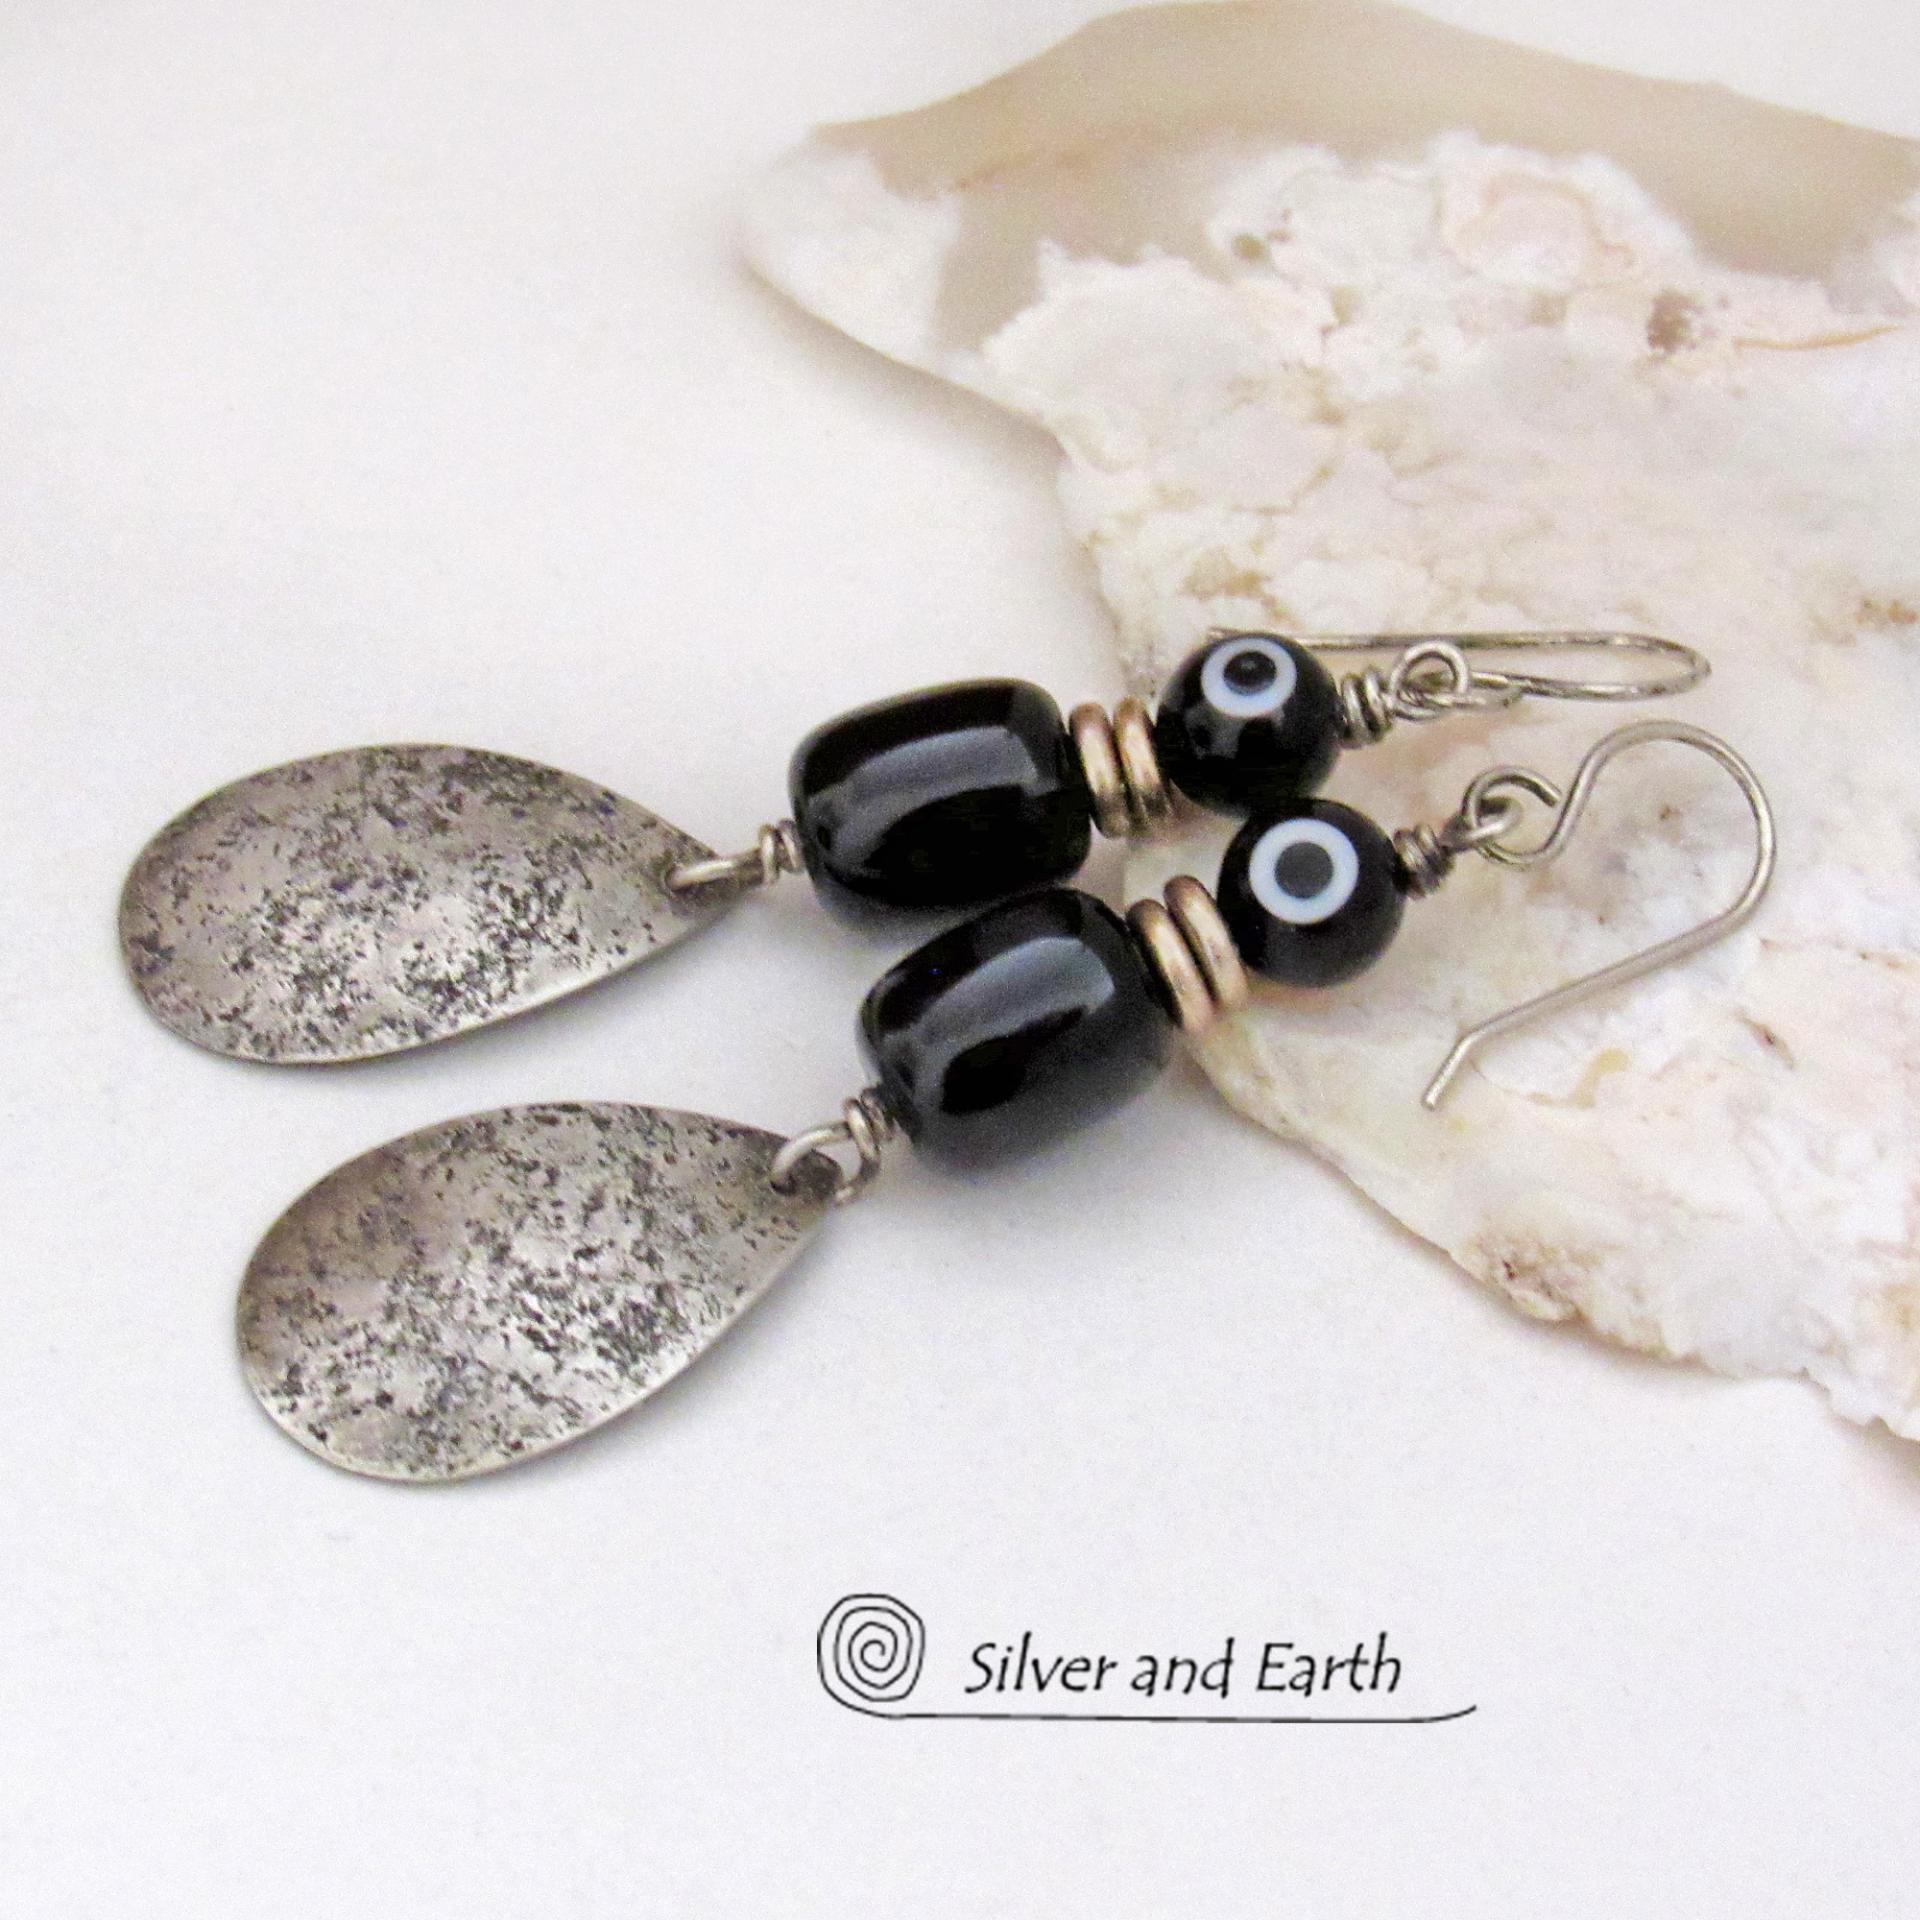 Sterling Silver Teardrop Dangle Earrings with Black Onyx Stones and Black & White Dotted Glass Beads